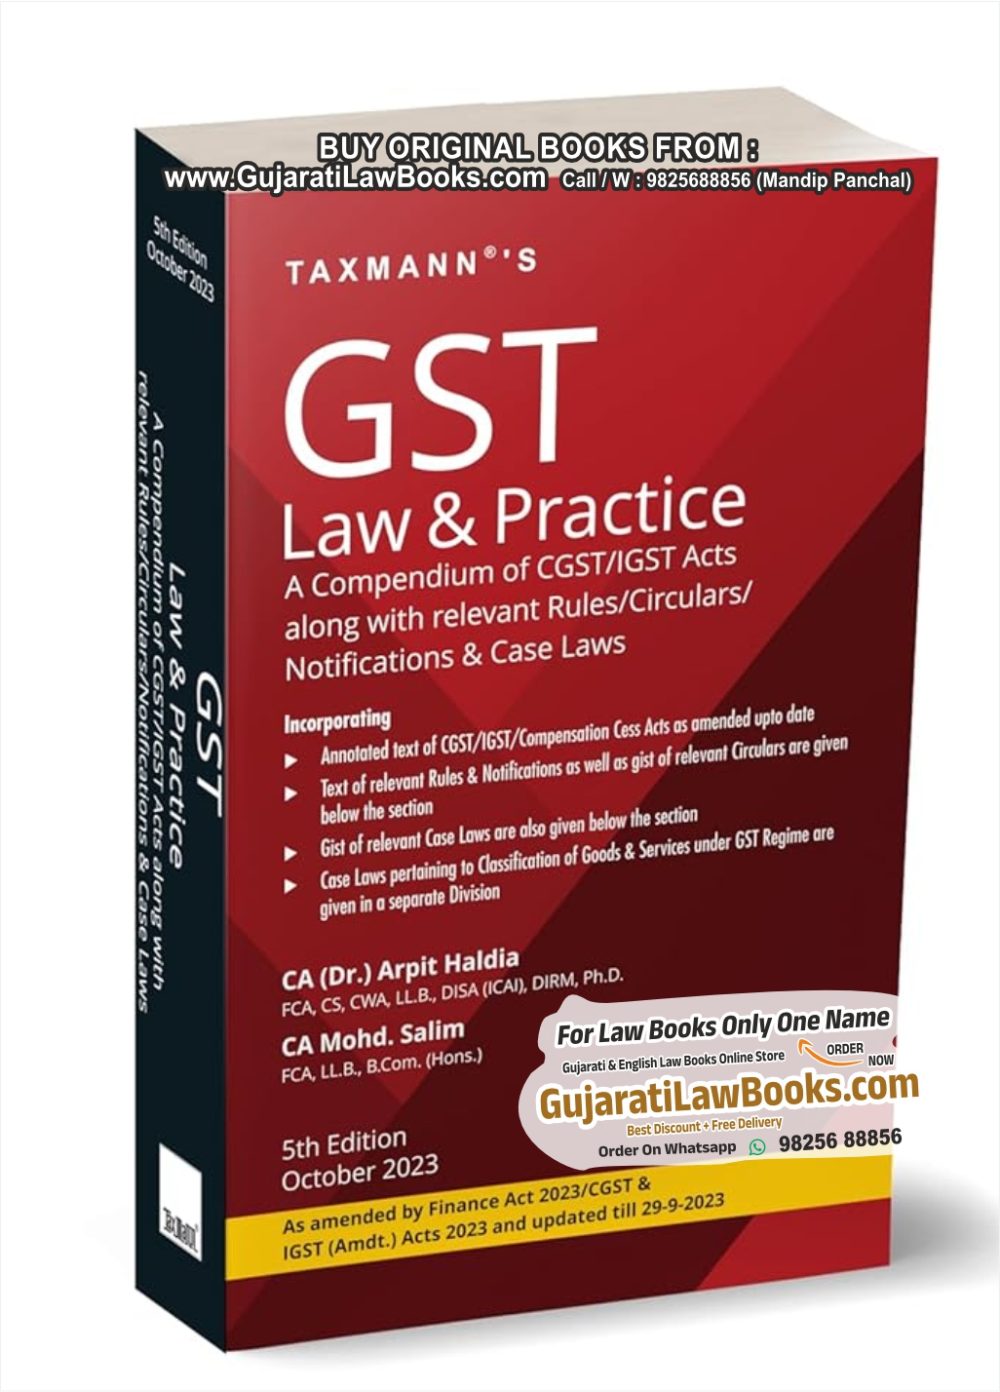 Taxmann's GST Law & Practice – Unique/Concise Compendium of Updated, Amended & Annotated text of CGST/IGST Acts along with Gist of Relevant Rules, Notifications, Forms, etc. [CGST/IGST Amdt. Act 2023] Paperback – 18 October 2023